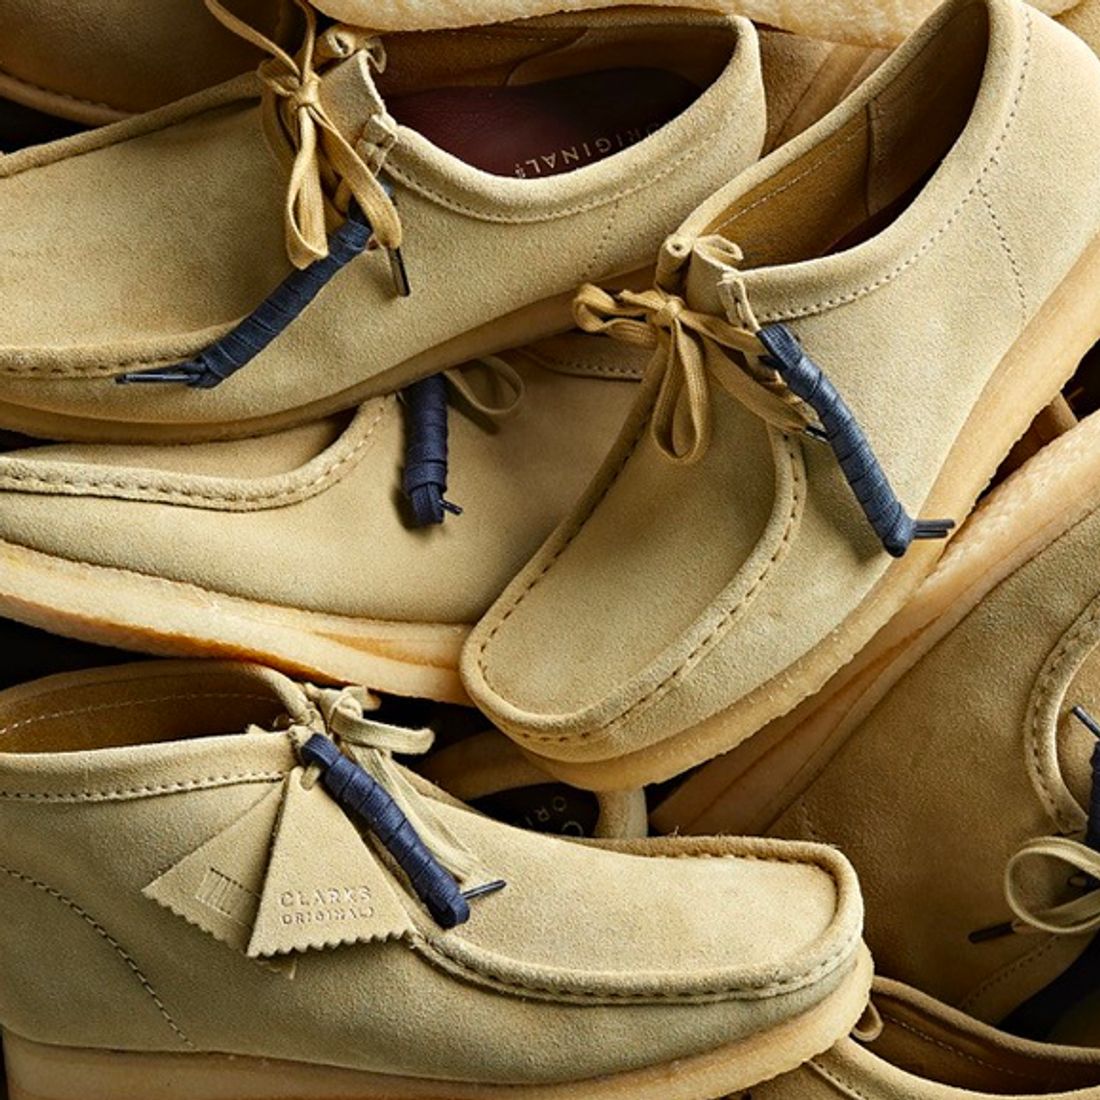 From Dancehall Hip Hop: A Sonic History of the Clarks Originals Wallabee Sneaker Freaker